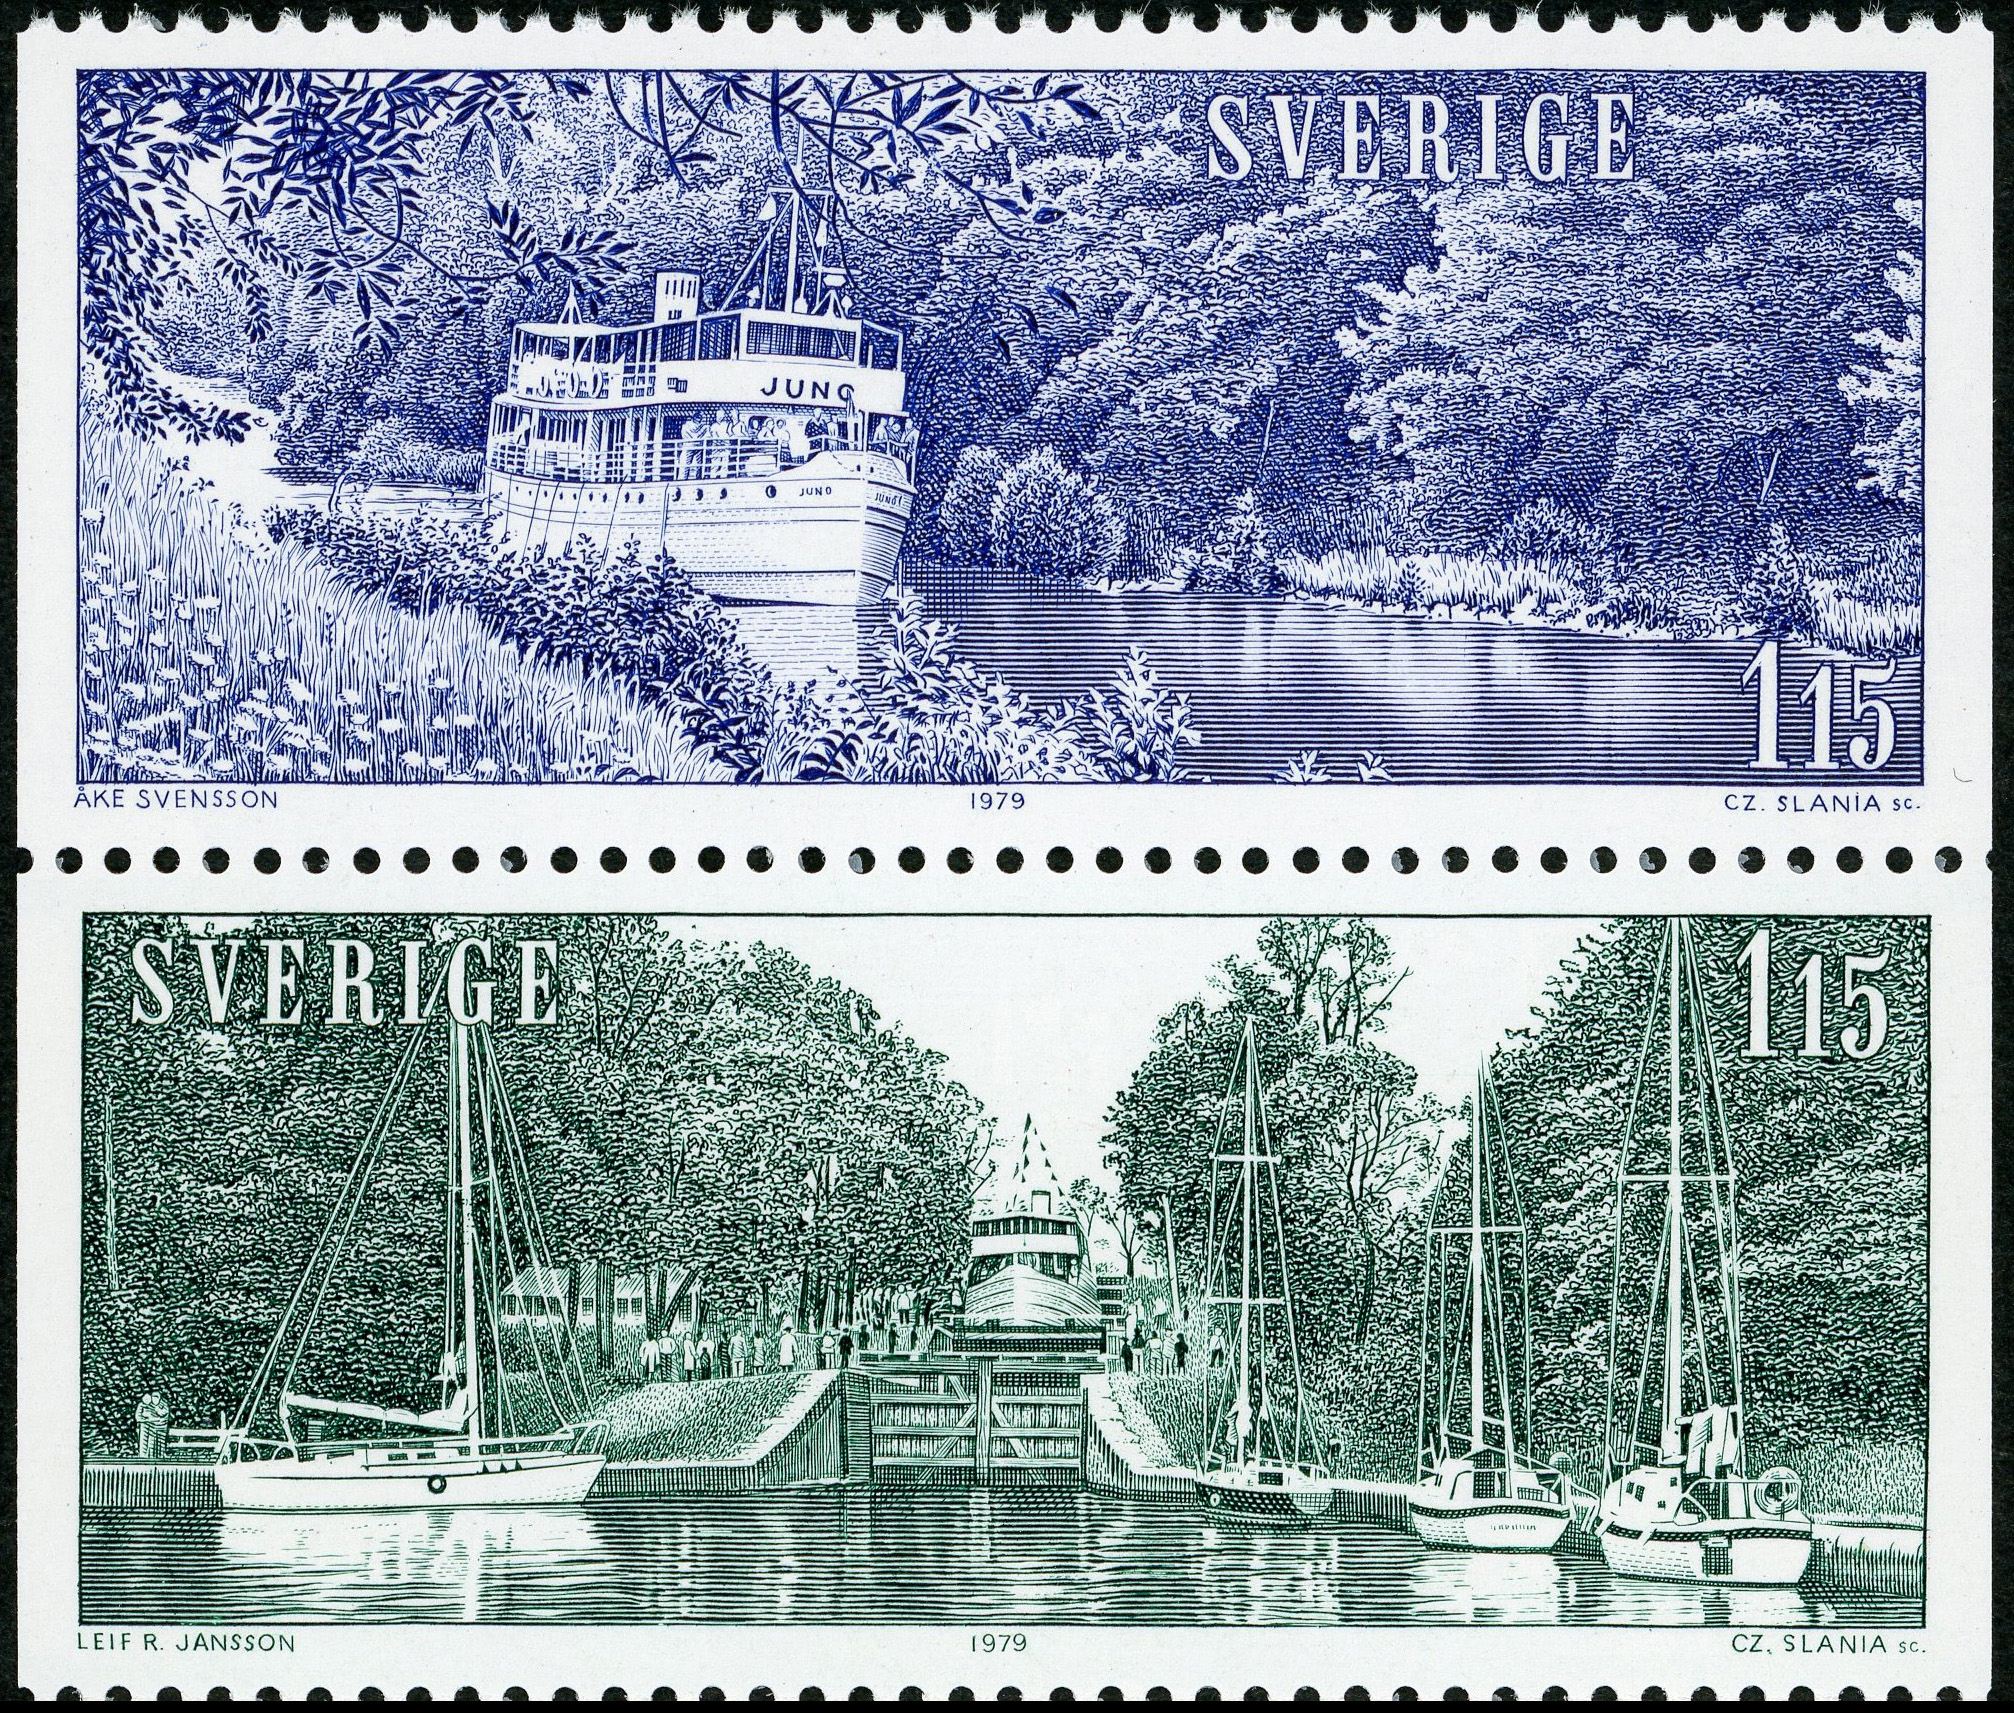 Two stamps from the Sweden 1979 Gota Canal commemorative booklet pane designed by Ake Svensson and Leif R. Jansson; engraved by Czeslaw Slania